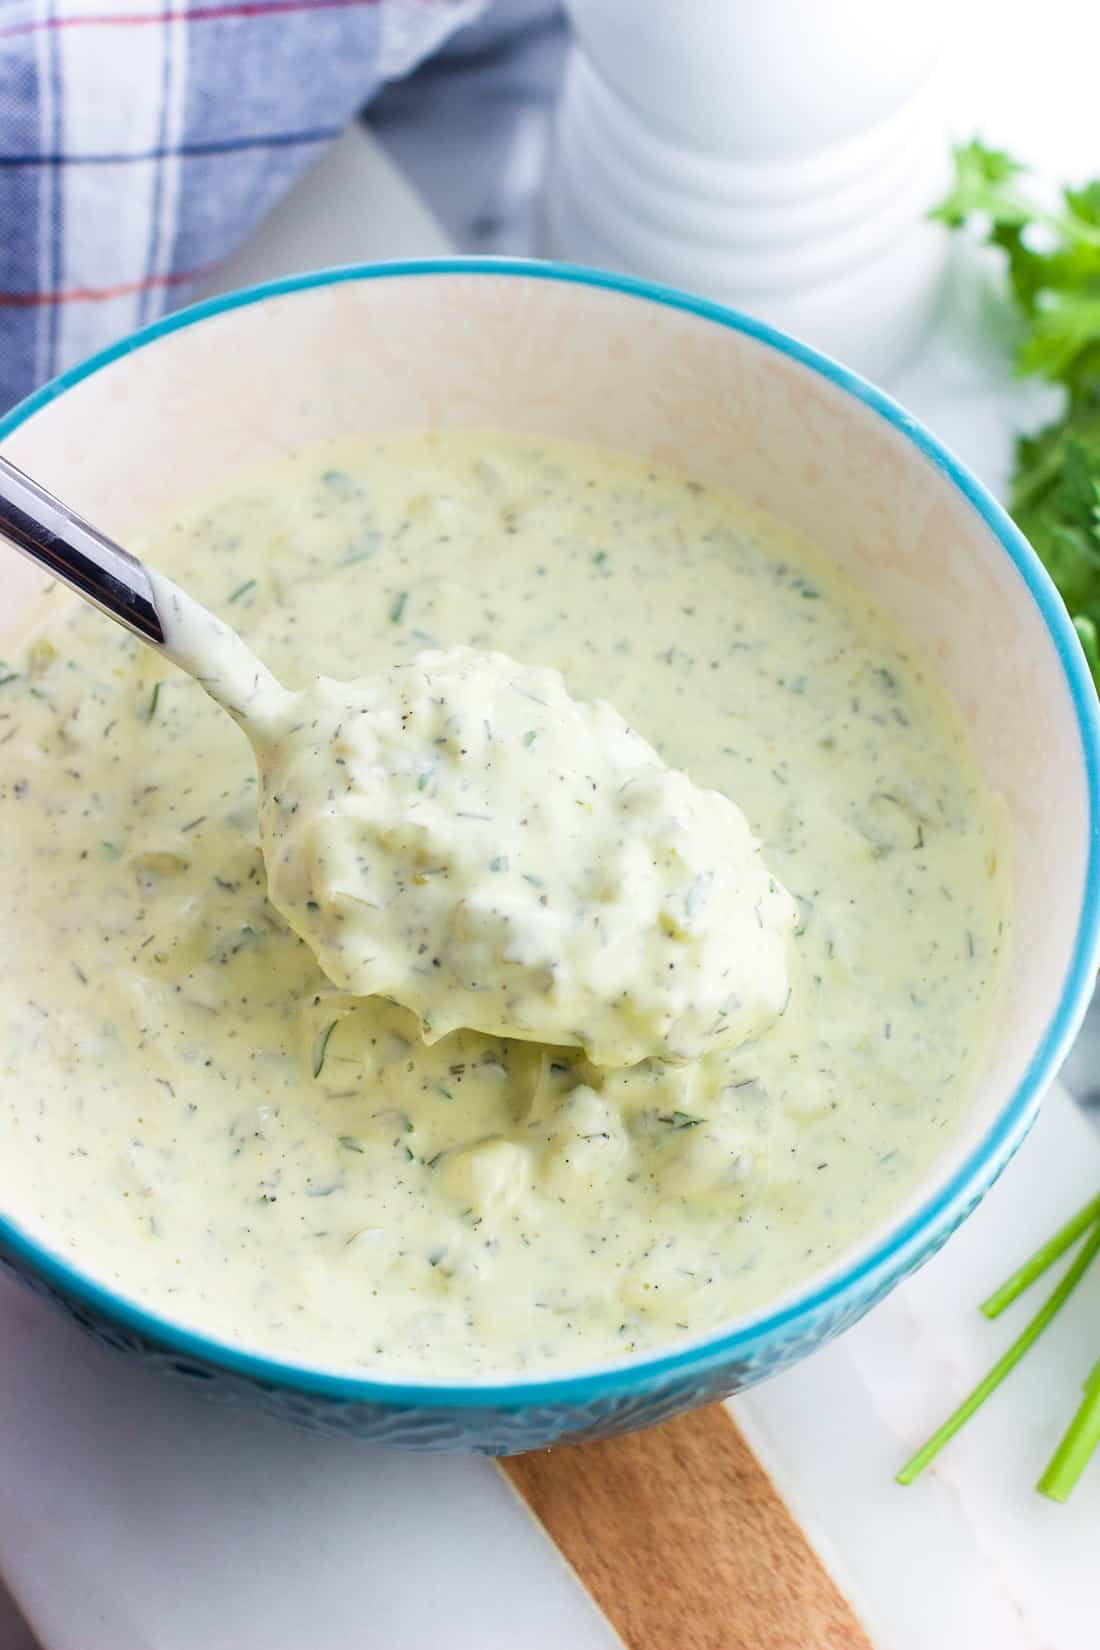 A spoon full of tartar sauce over a serving bowl